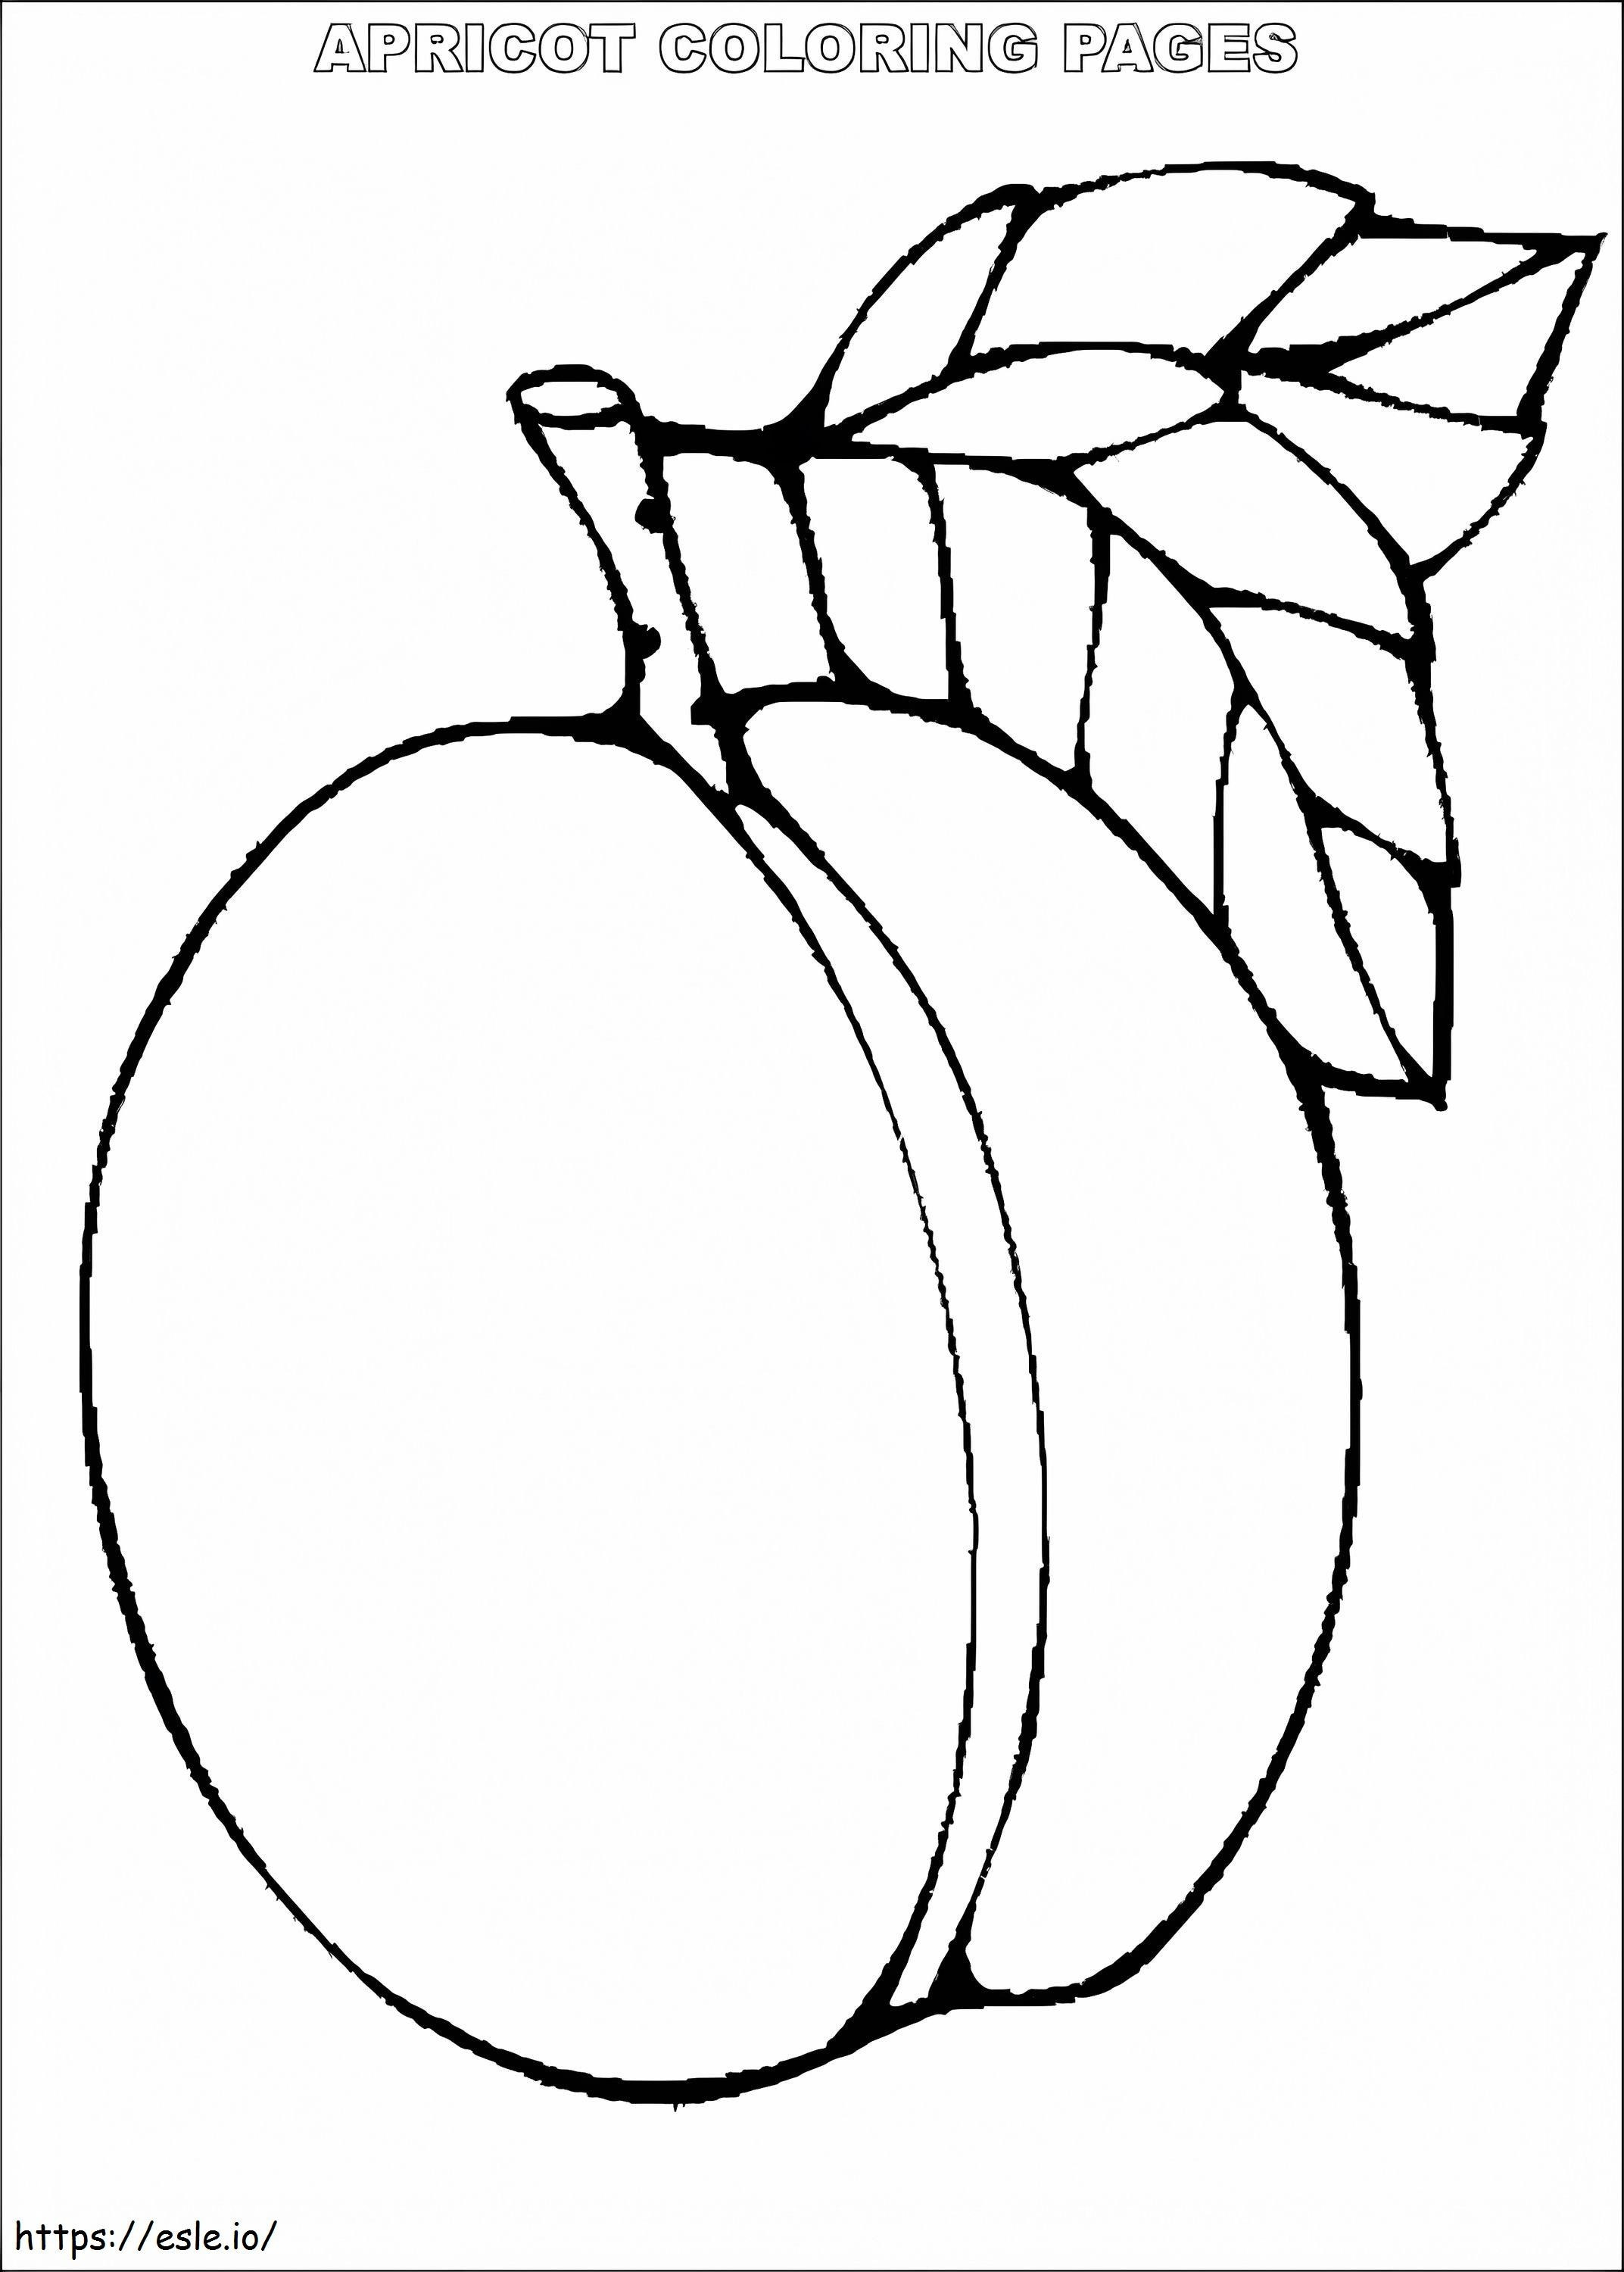 Simple Apricot coloring page